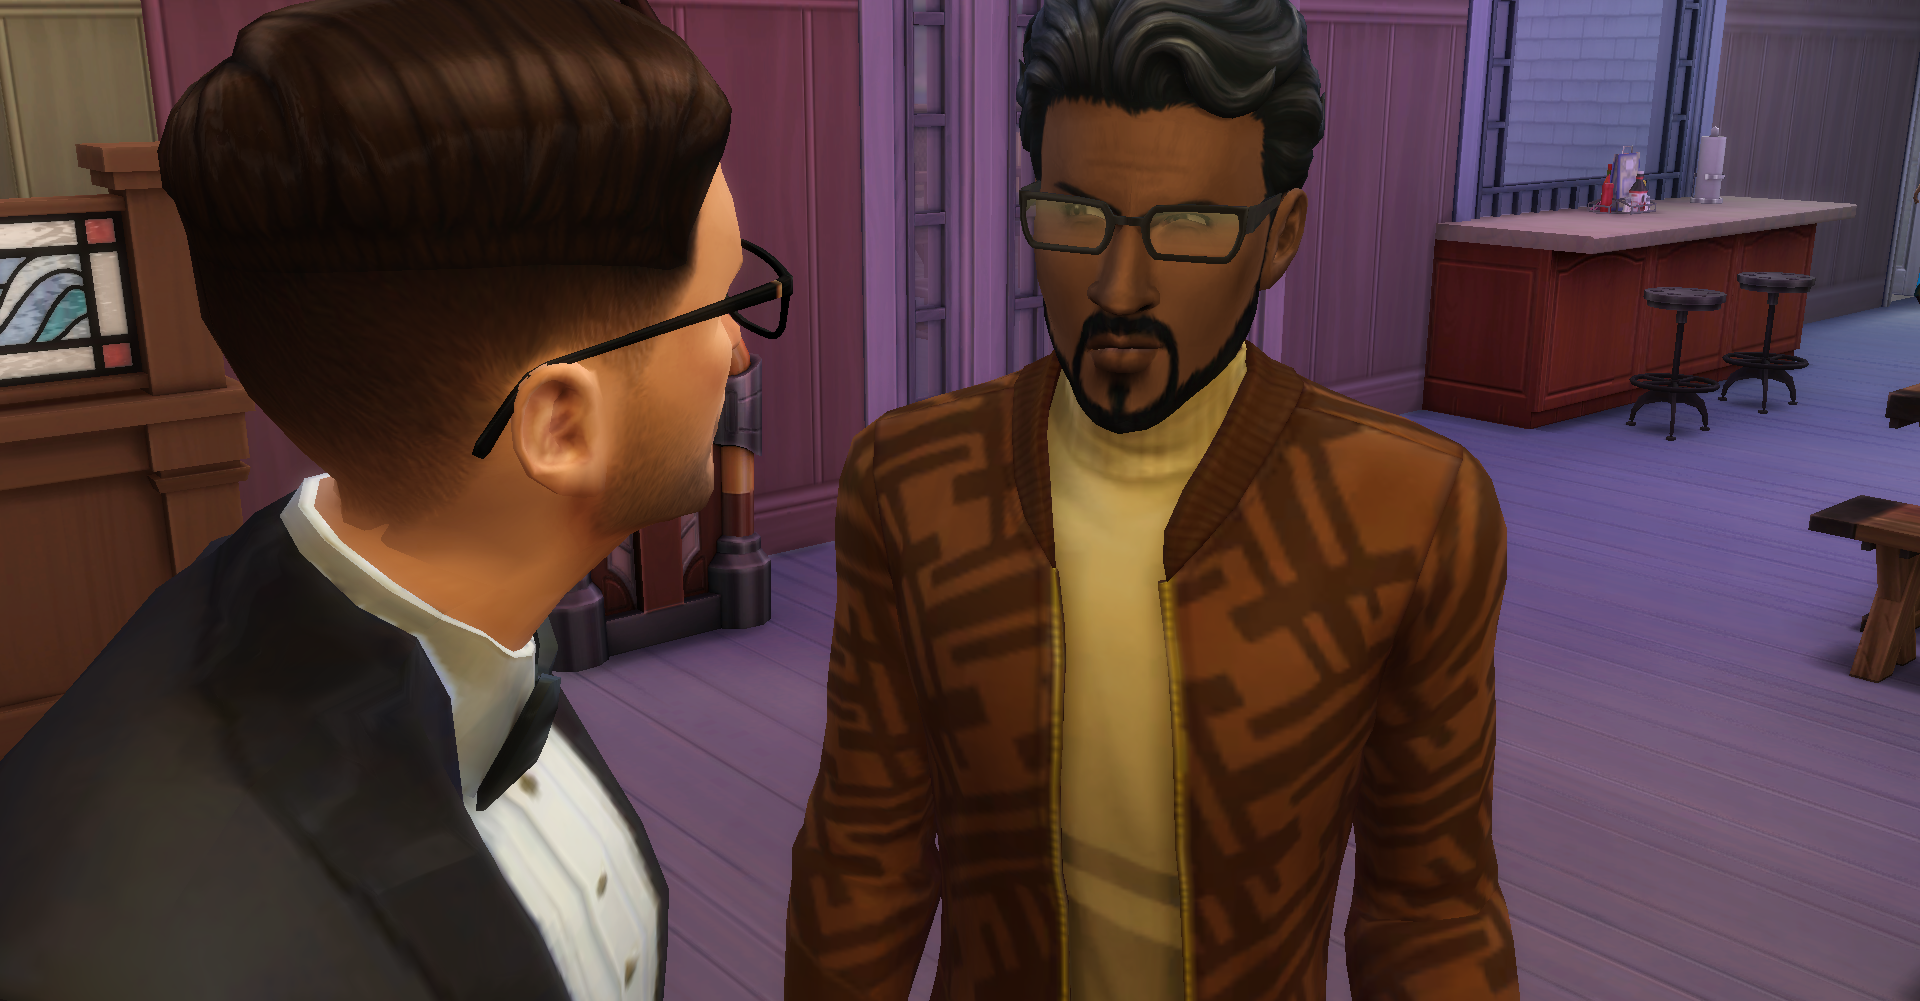 Hot Complications Sims Story Page 5 The Sims 4 General Discussion 3072